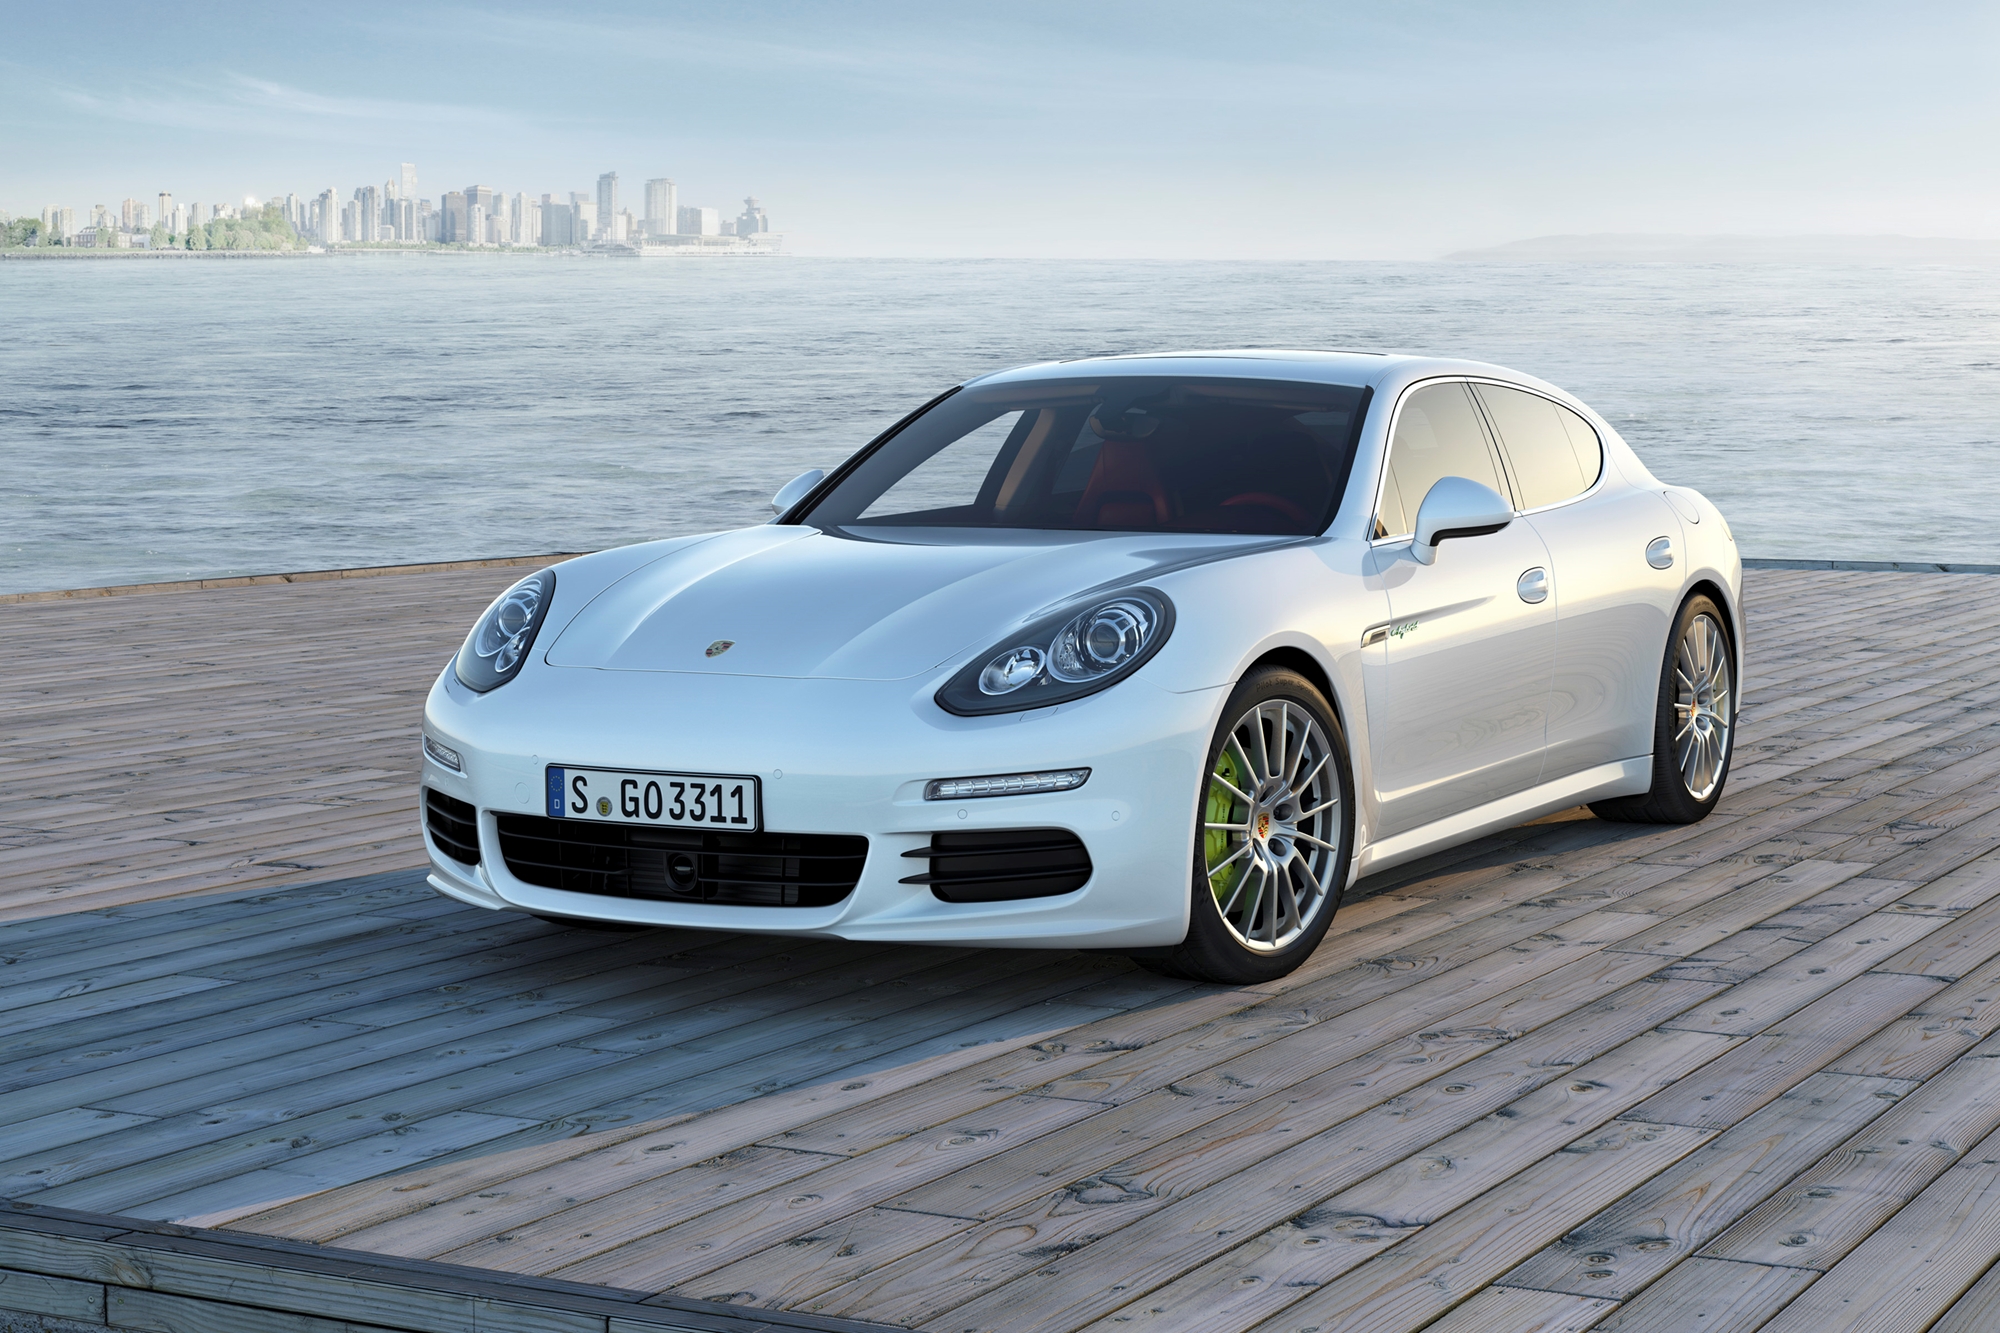 2016 Porsche Panamera S EHybrid Full Specs, Features and